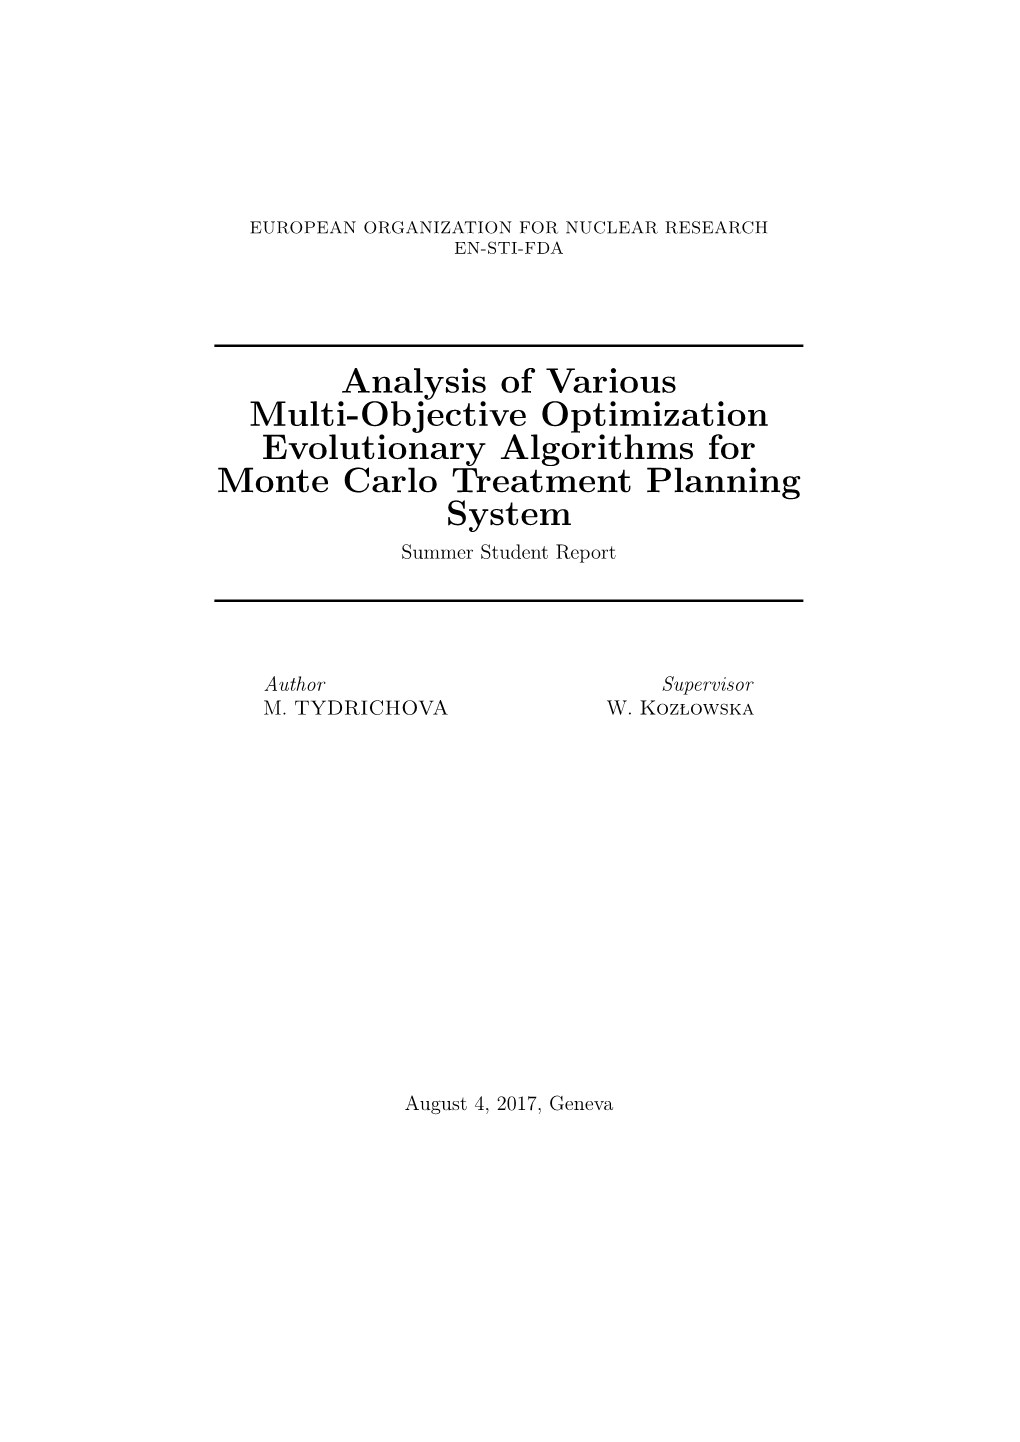 Analysis of Various Multi-Objective Optimization Evolutionary Algorithms for Monte Carlo Treatment Planning System Summer Student Report